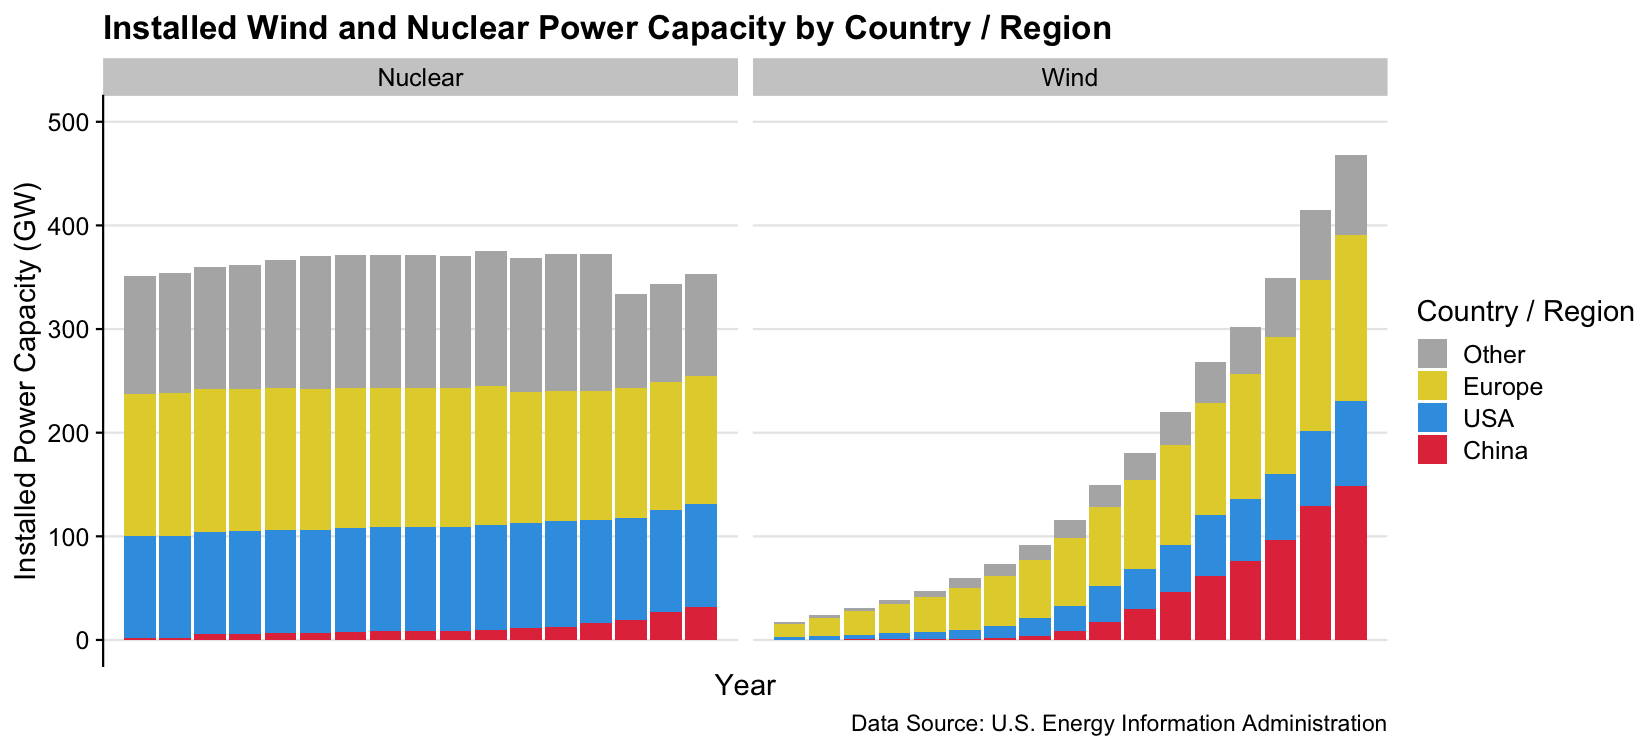 Installed Wind and Nuclear Power Capacity by Country / Region, 2000 - 2016.